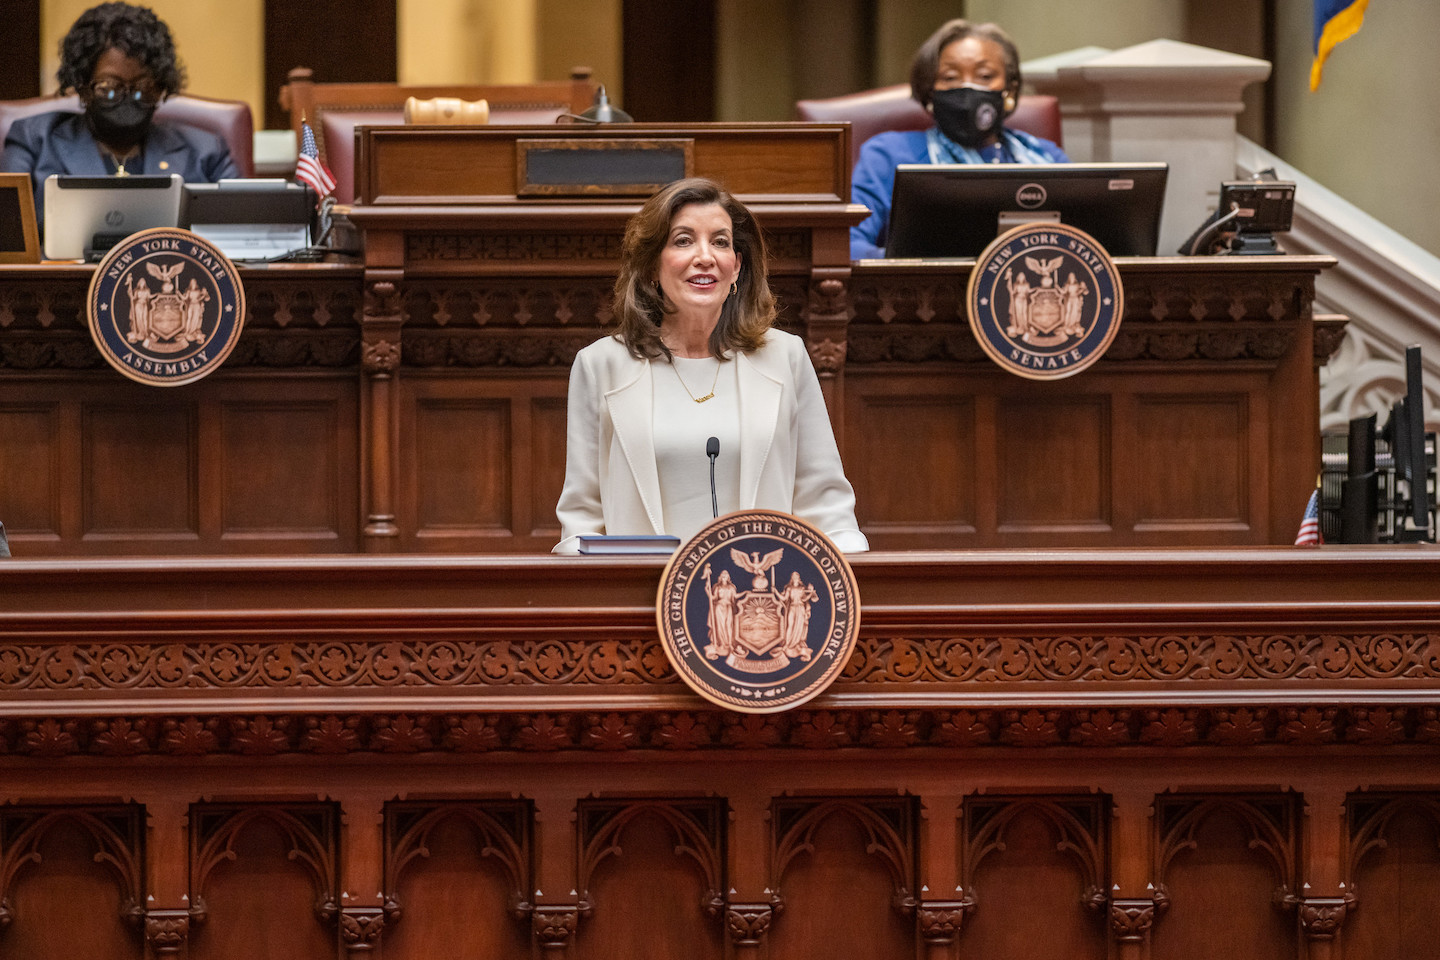 Gov. Kathy Hochul delivers the 2022 State of the State address in the Assembly Chamber at the State Capitol. (Photo by Darren McGee/Office of Gov. Kathy Hochul)